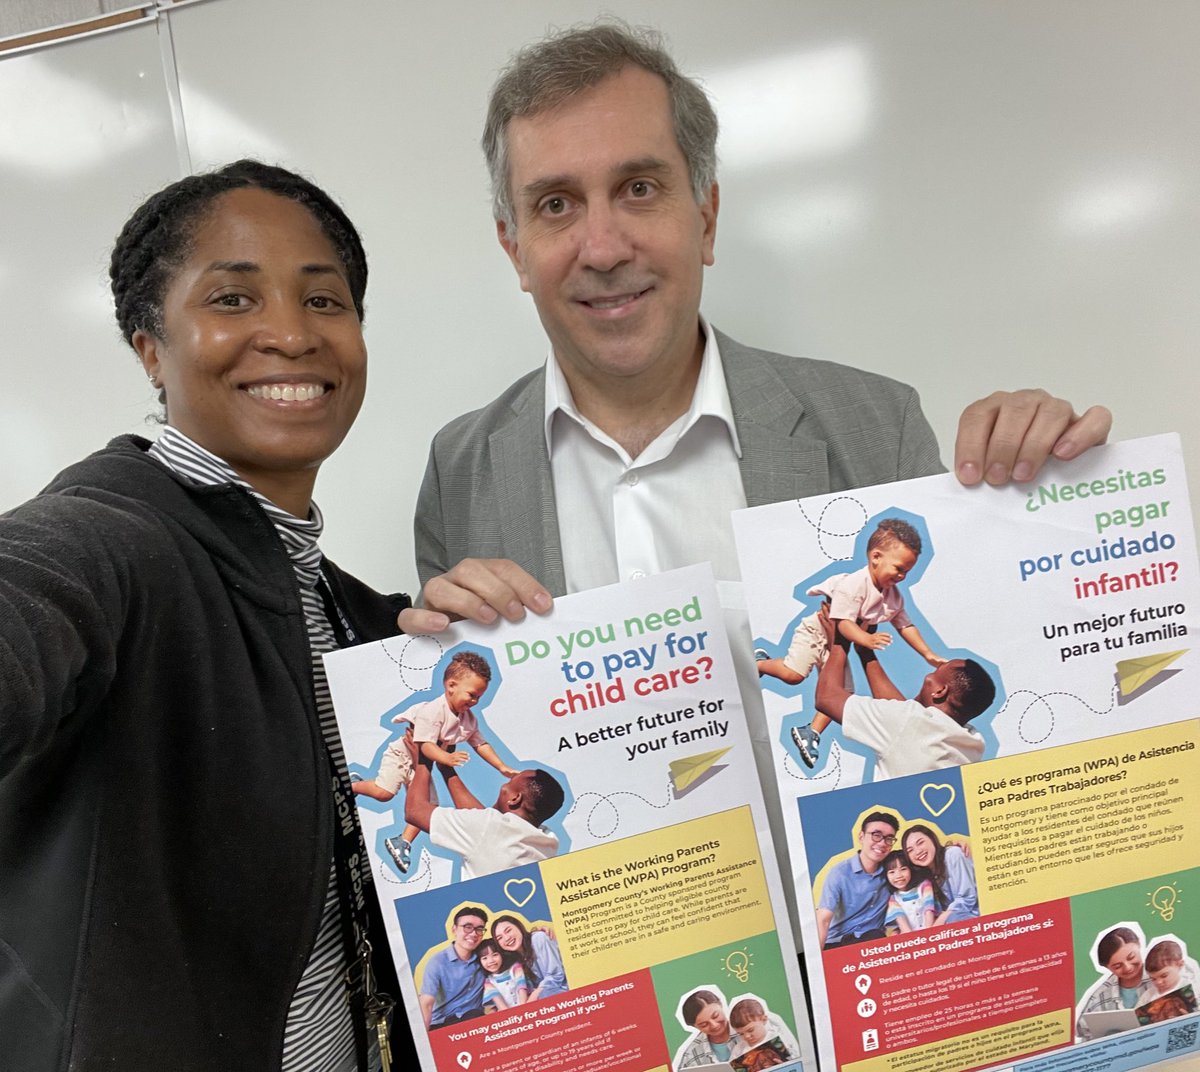 I had an enlightening meeting today with Cesar, an outreach coordinator from @MoCoDHHS Working Parents Assistance Program about #affordablechildcare in the county. Click the link for more info montgomerycountymd.gov/HHS-Program/CY…
@MCPSCommunitySc